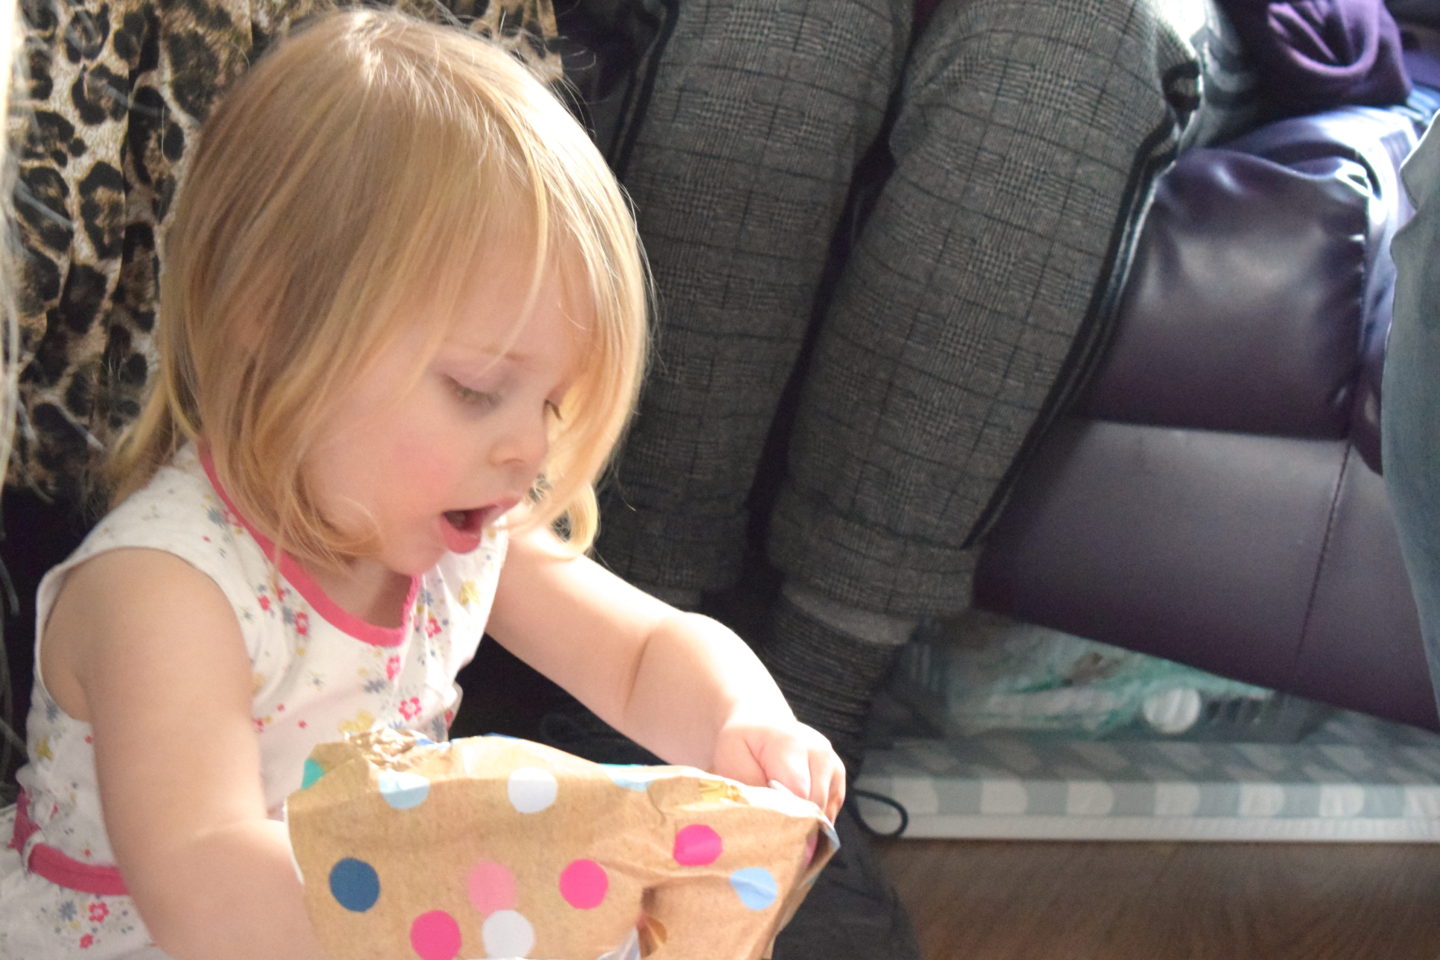 Two year old in a party dress, opening a present